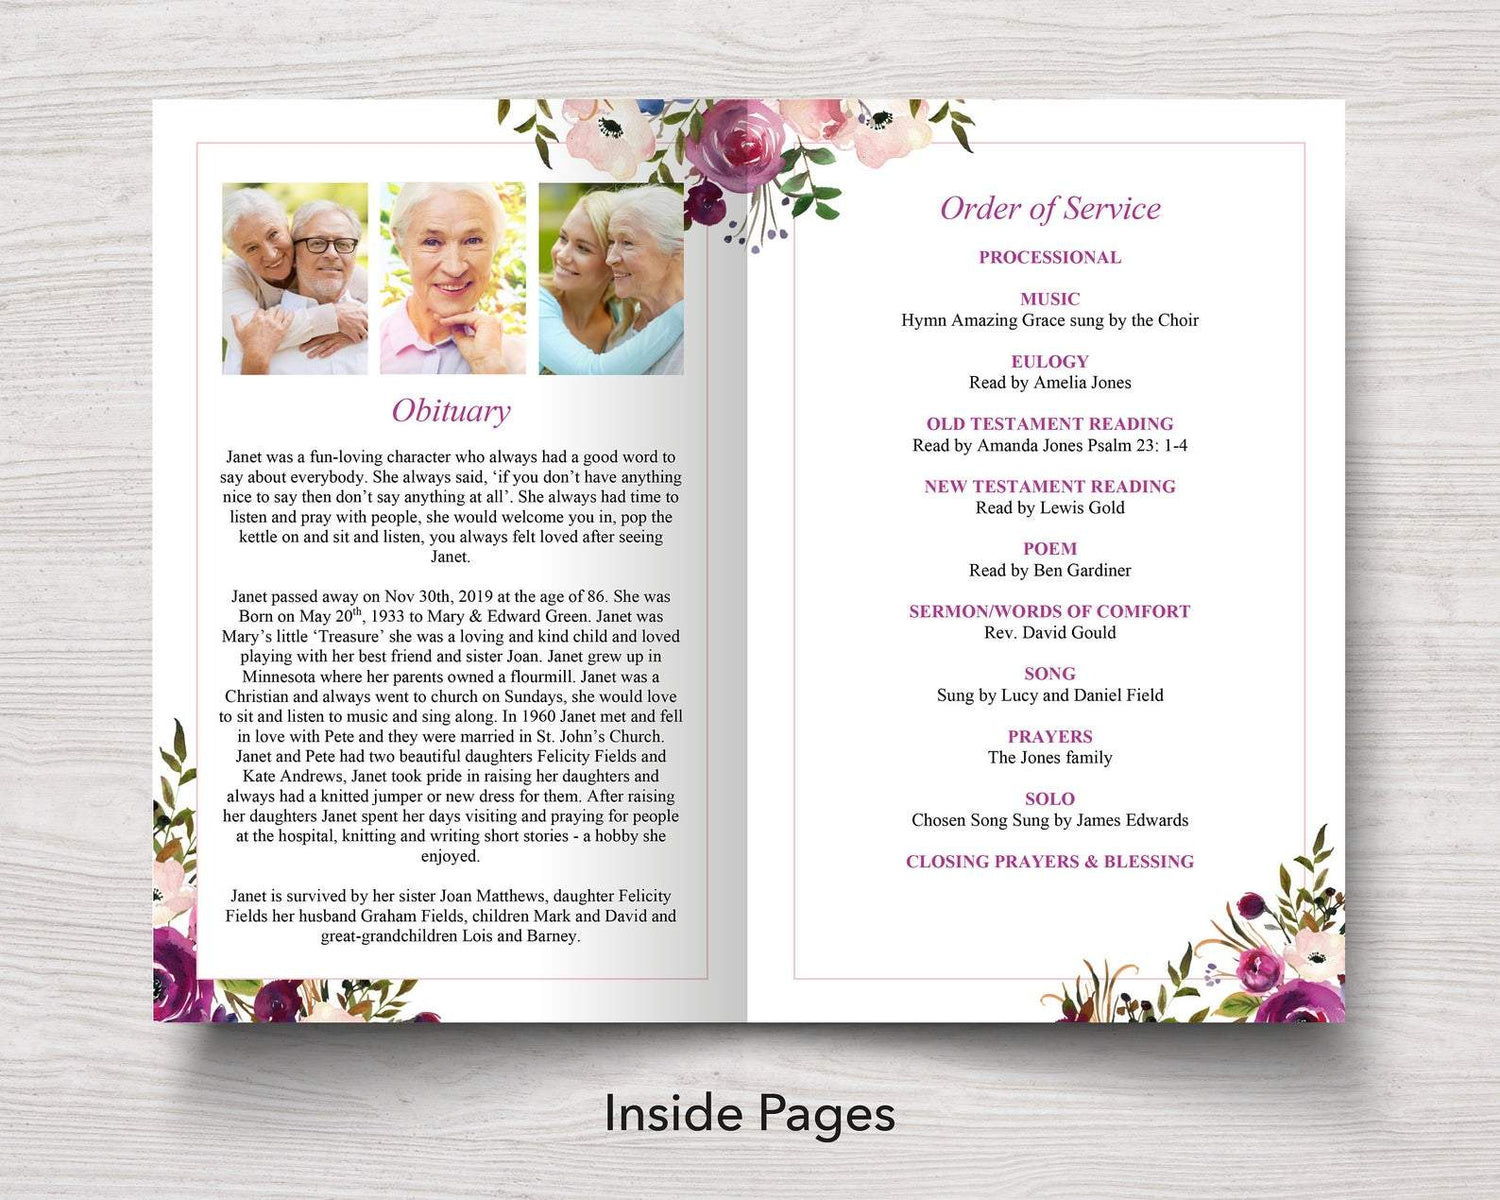 4 Page Purple Roses Funeral Program Template